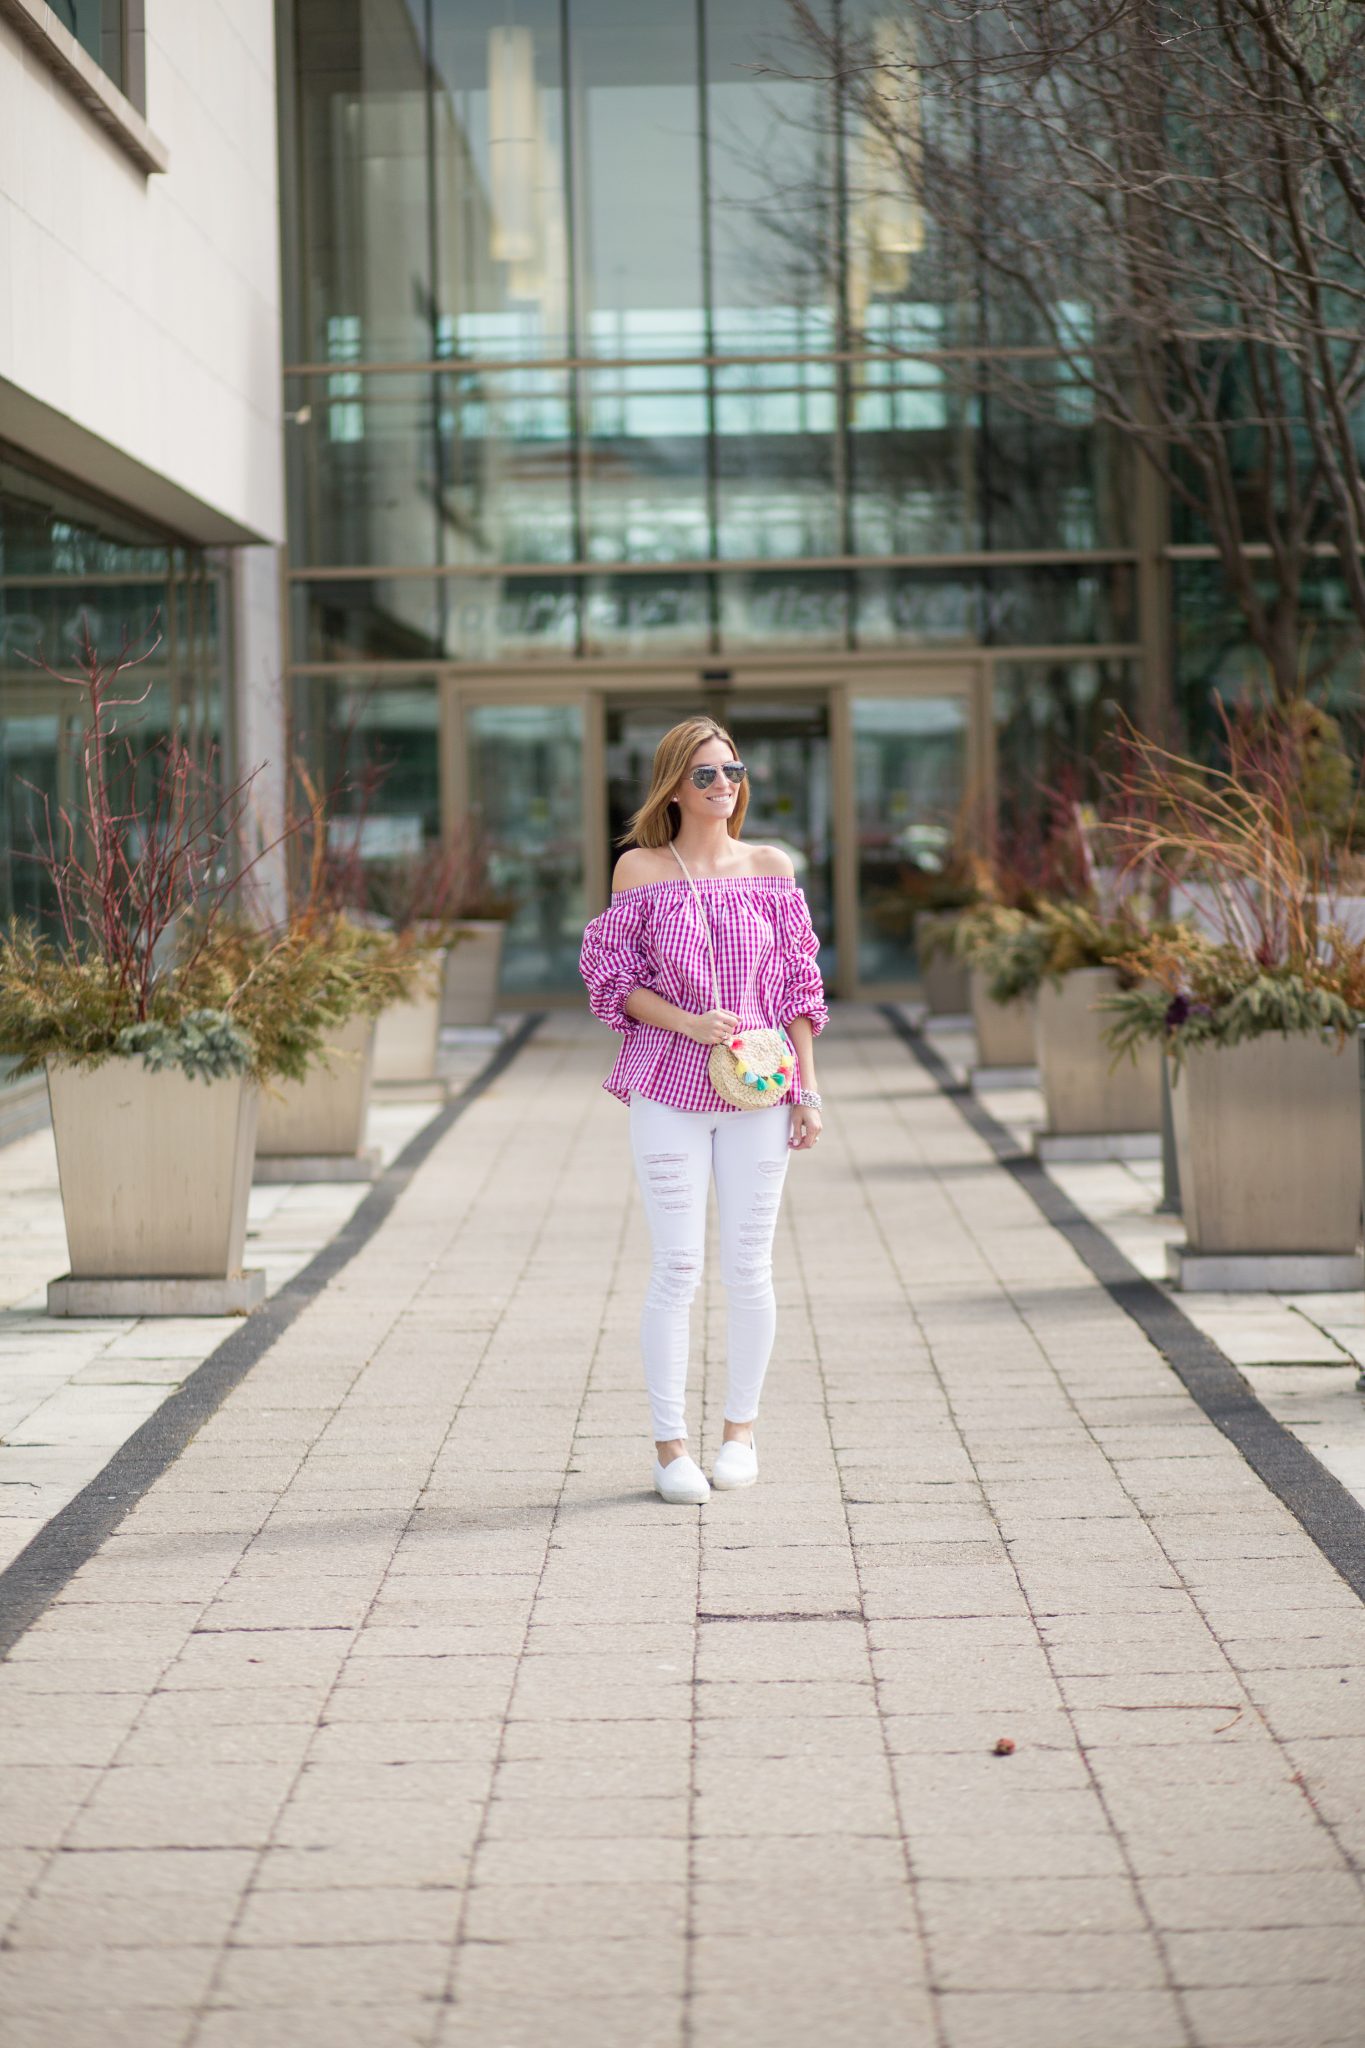 sparkleshinylove Chicwish Gingham Channel Off-shoulder Top in Hot Pink, White J.Brand distressed jeans, Chanel white espadrilles, tassel cross body from Zara, Silver Ray-Ban Aviators